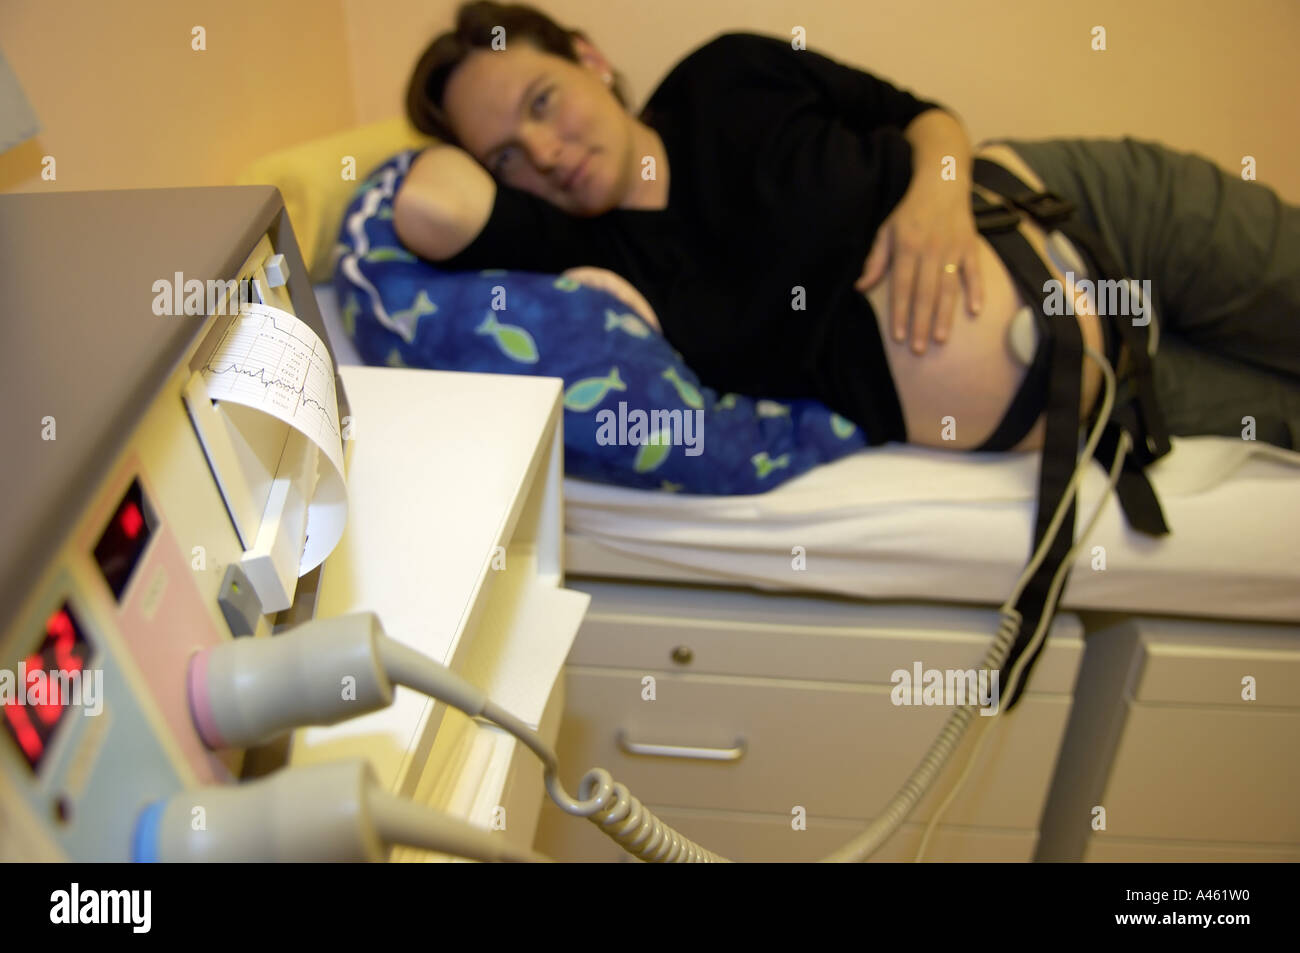 Pregnant woman with heartmonitor to monitor the babys heartbeat Stock Photo